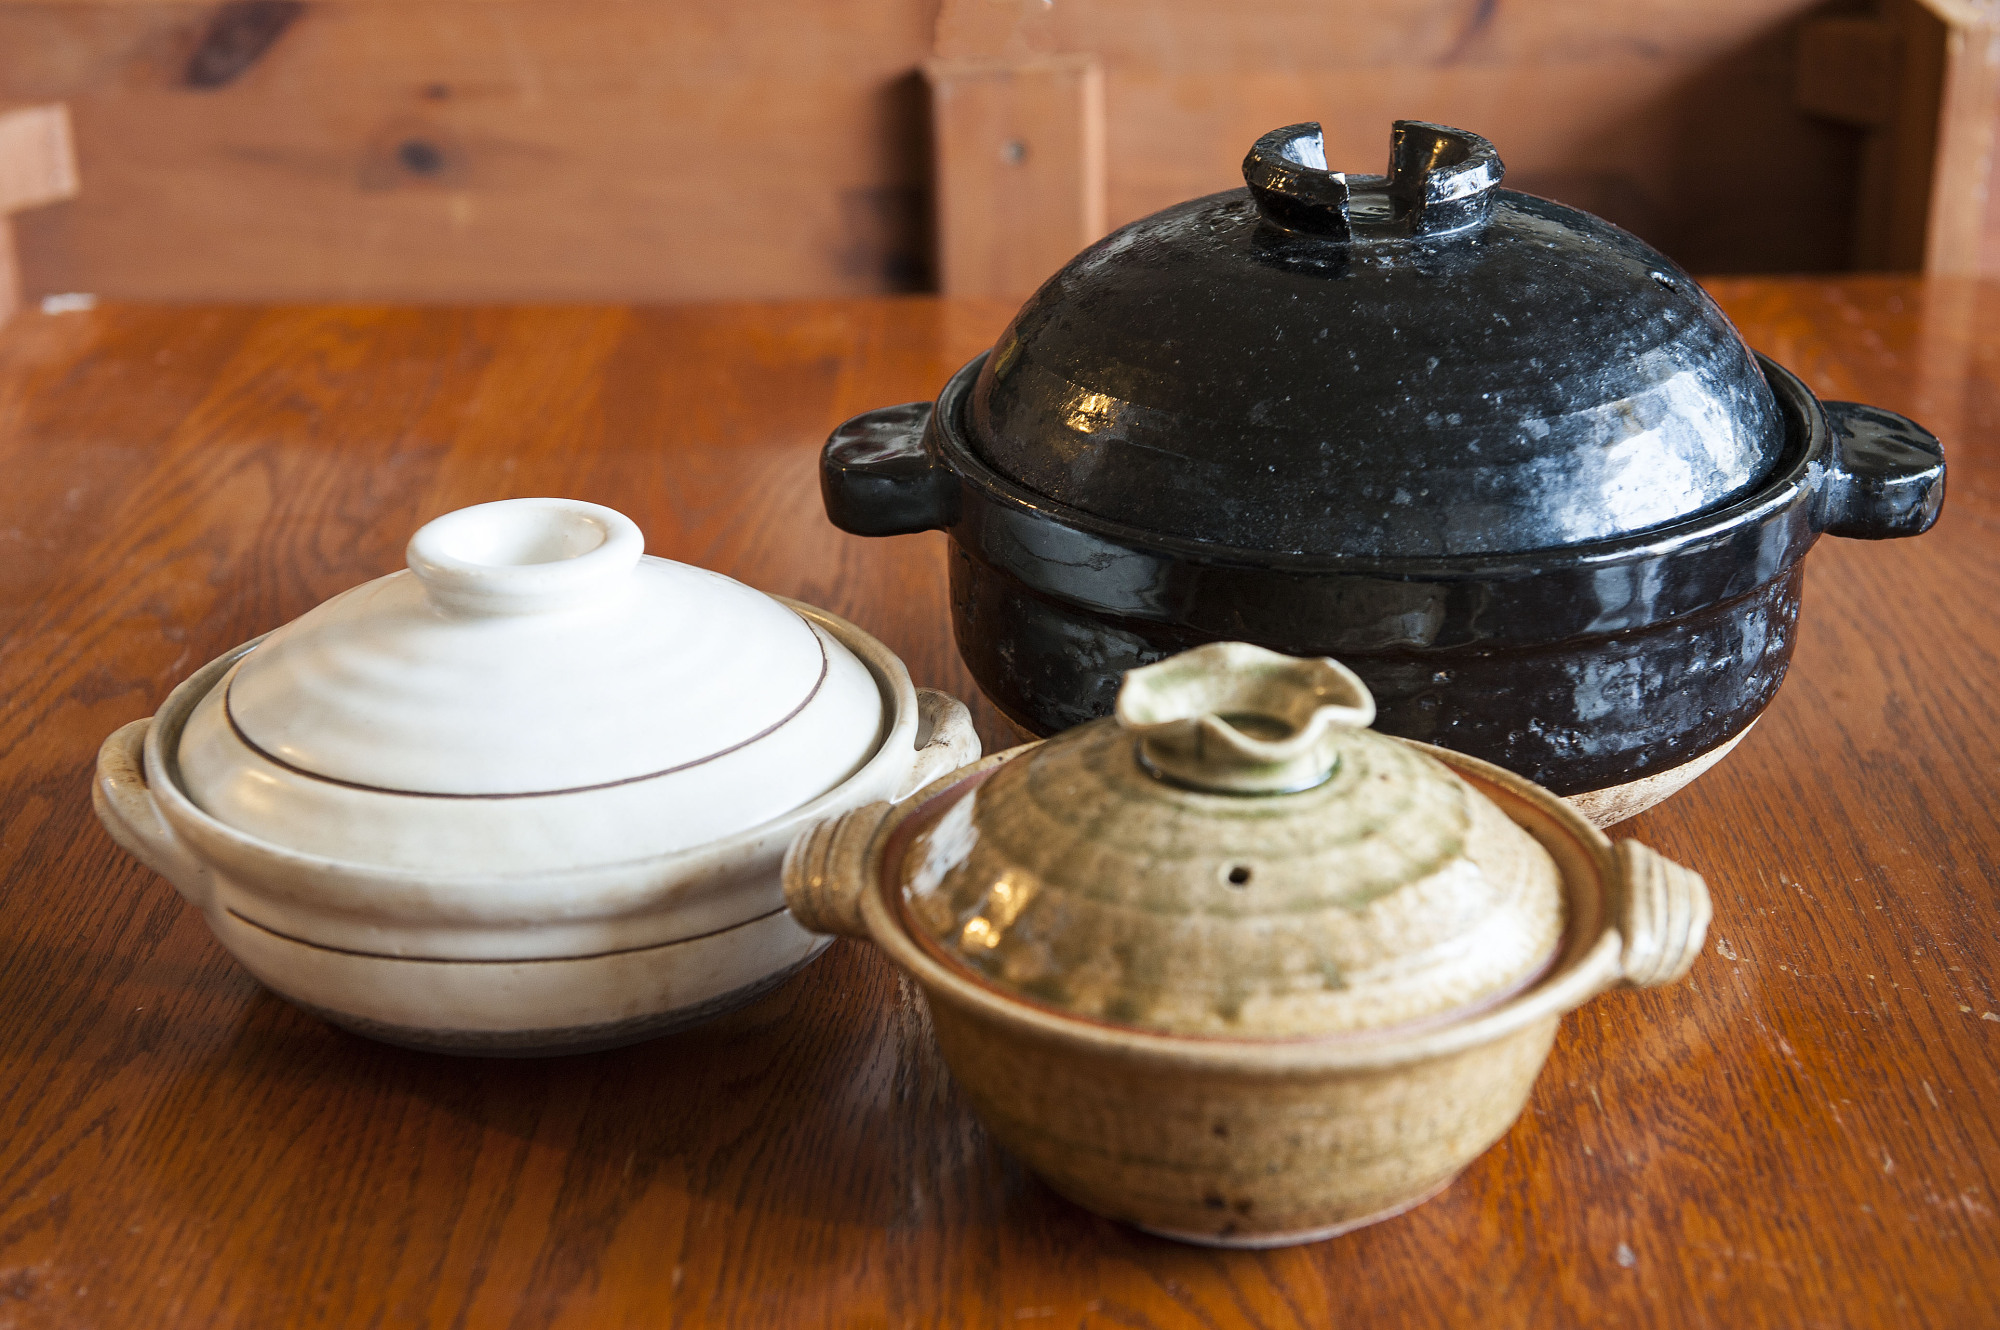 Donabe: The hardy pot that cooks swear by | The Japan Times